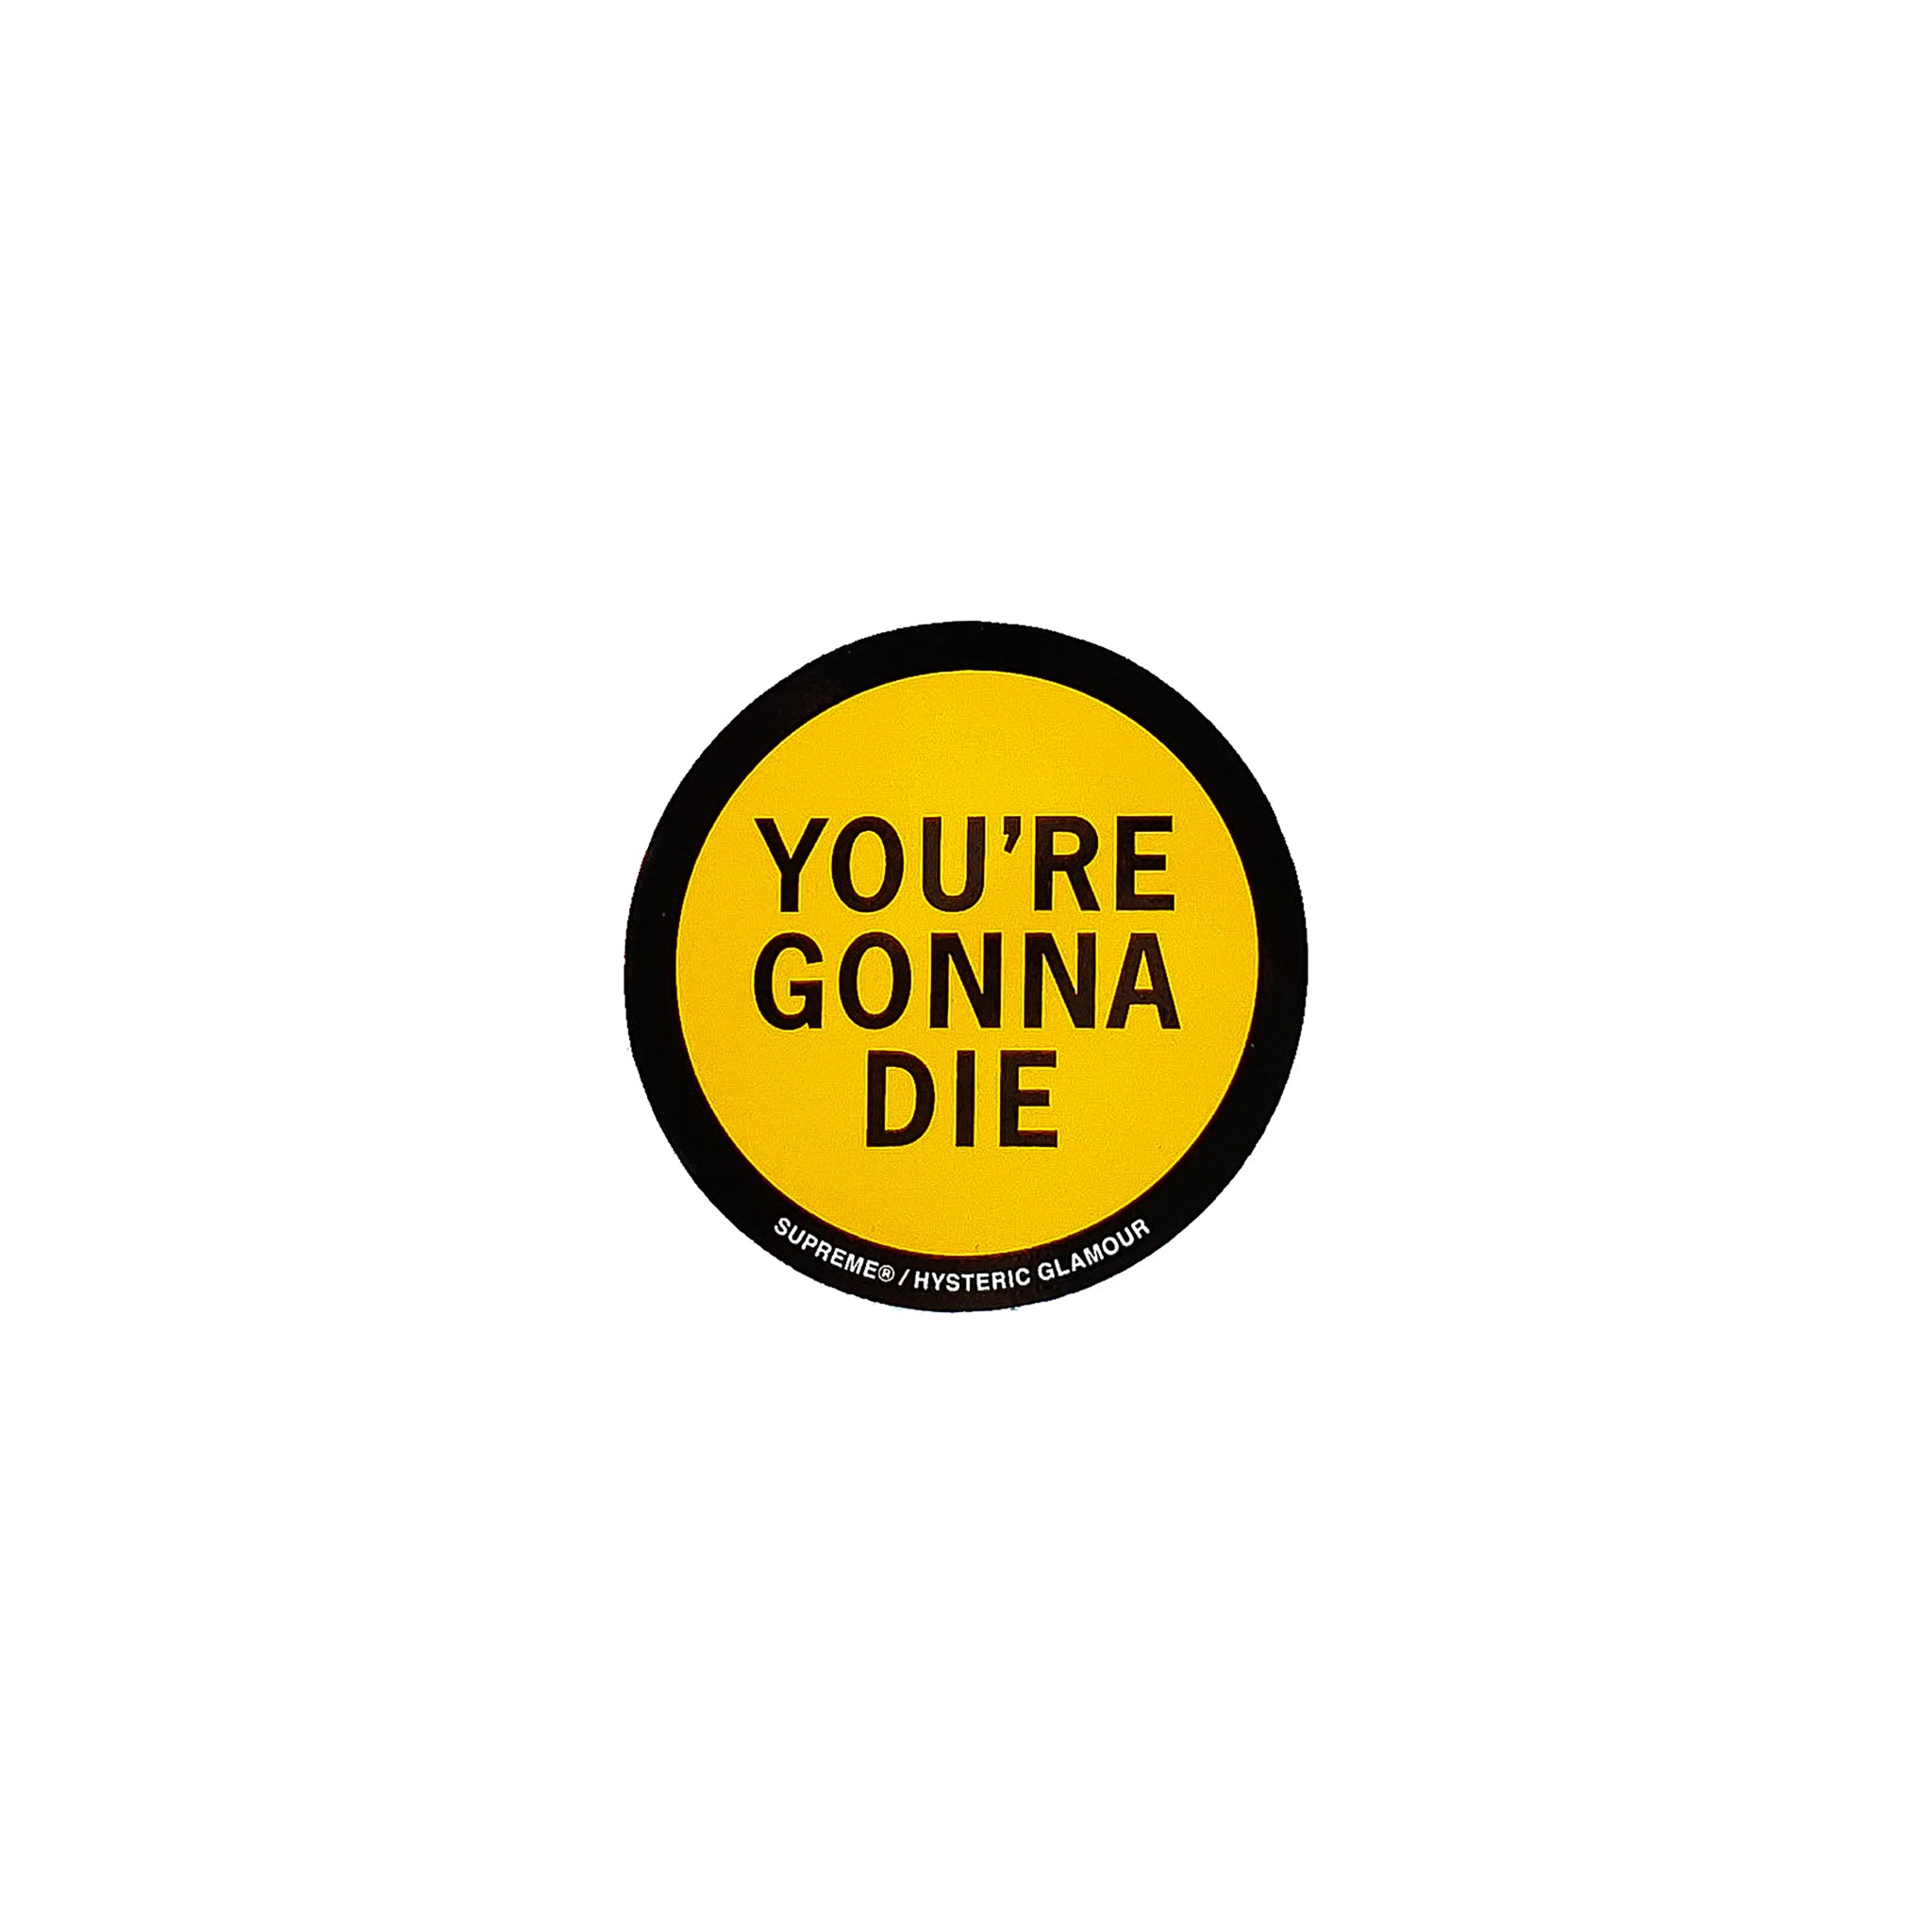 SUPREME HYSTERIC GLAMOUR YOU'RE GONNA DIE STICKER